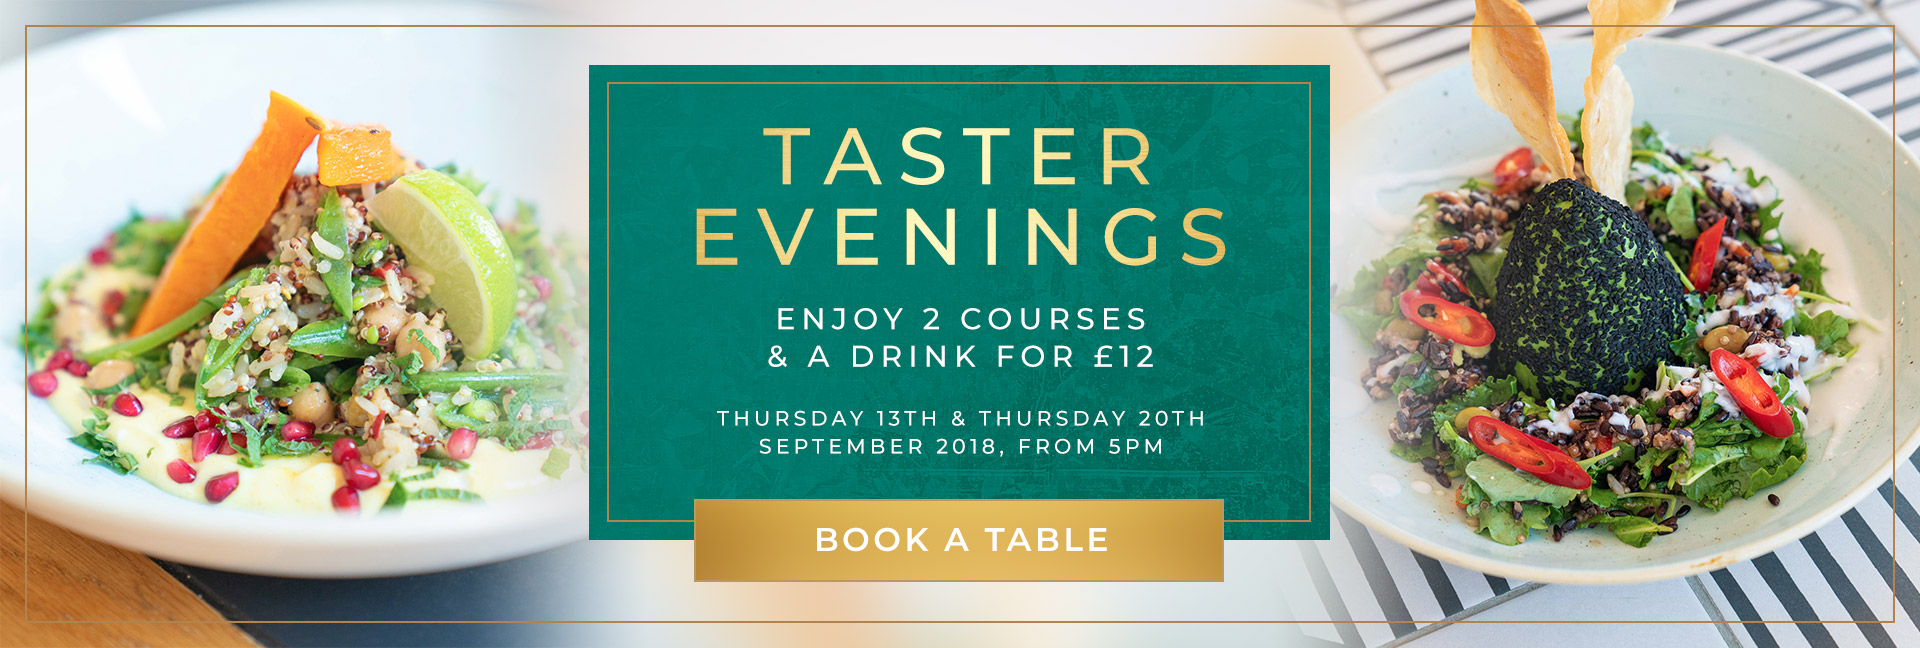 Taster evenings at All Bar One - Book Now